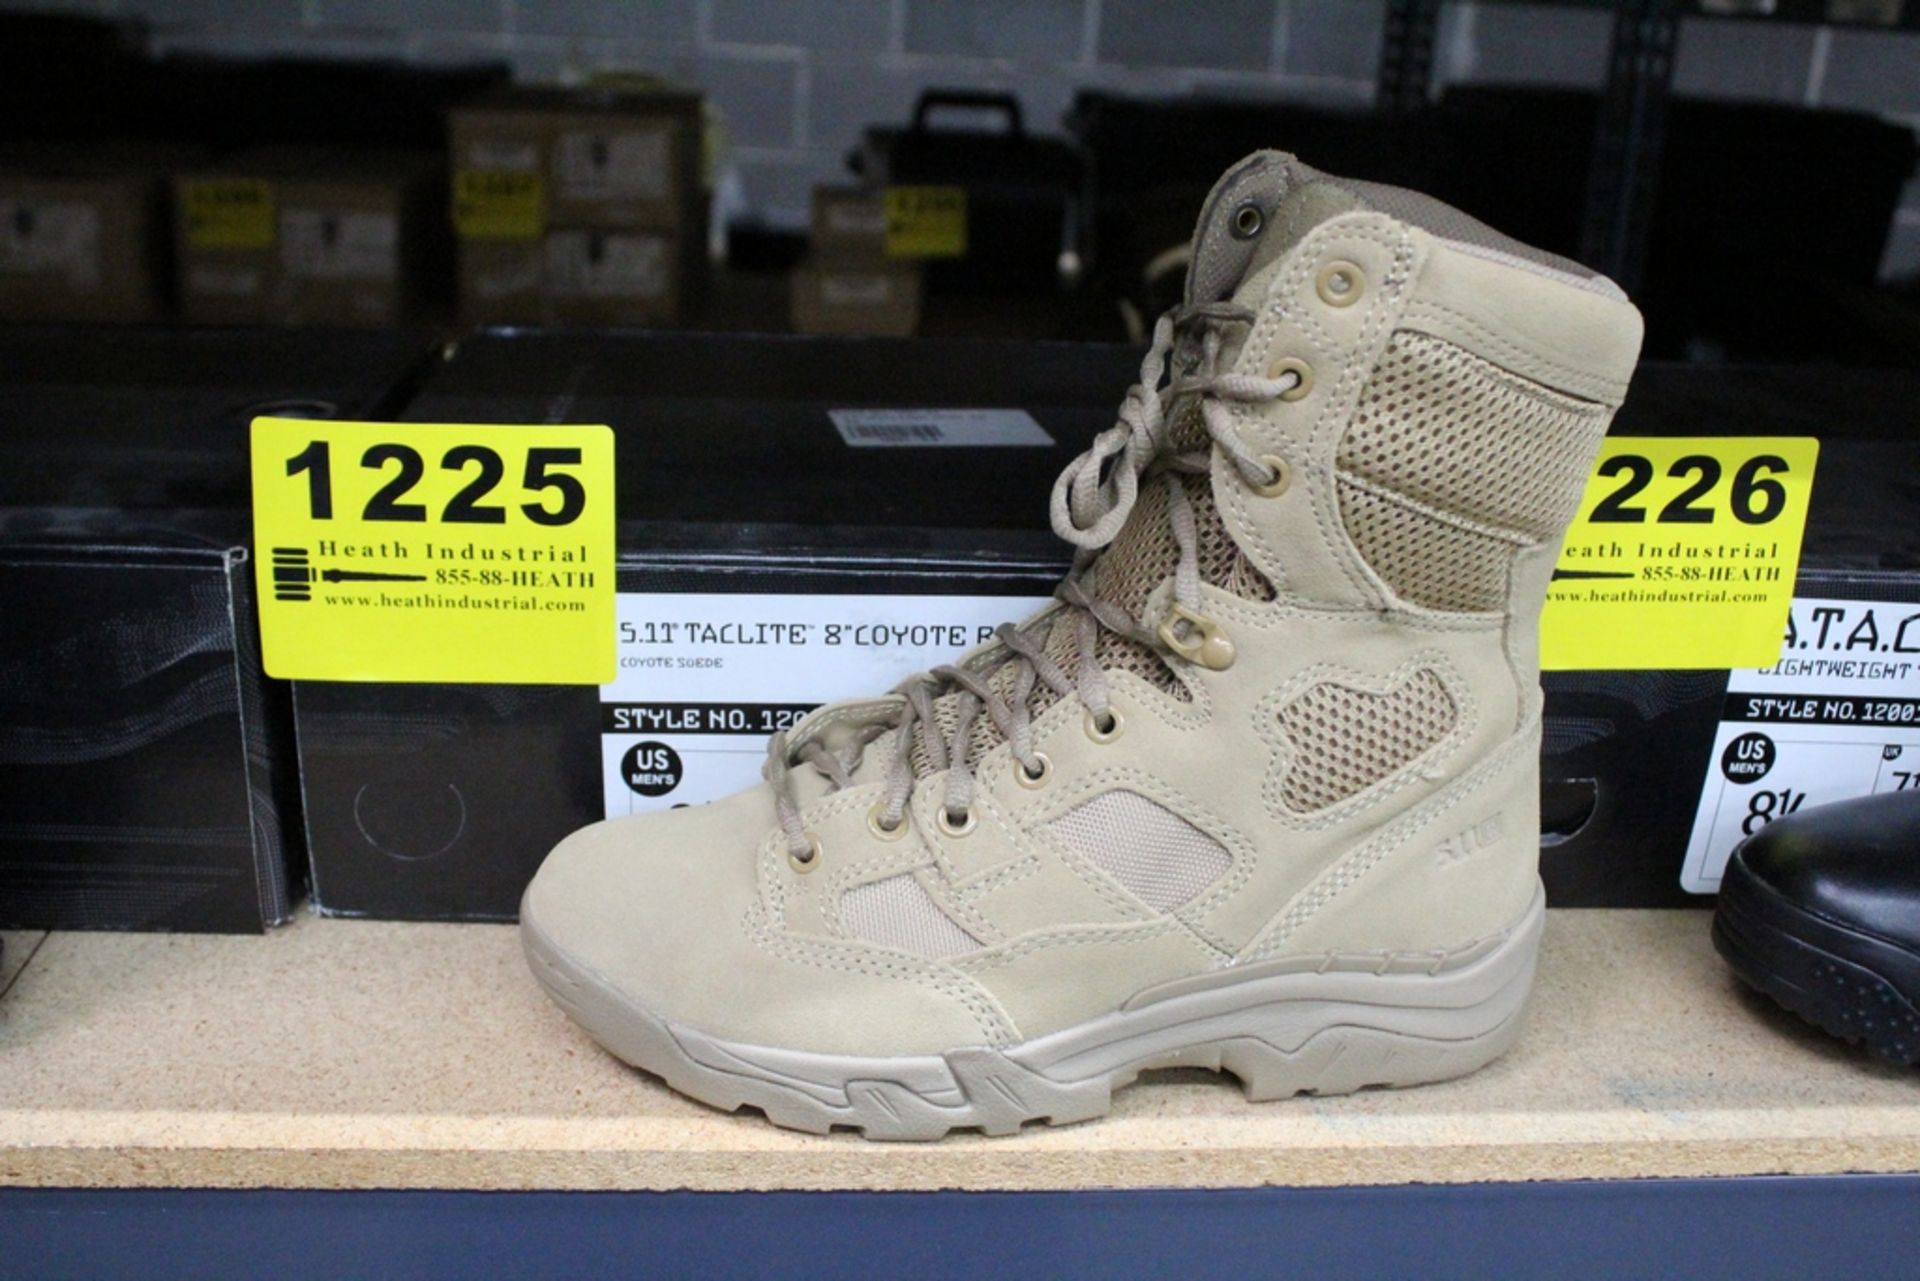 5.11 TACTICAL 8" COYOTE BOOT, SIZE 8.5